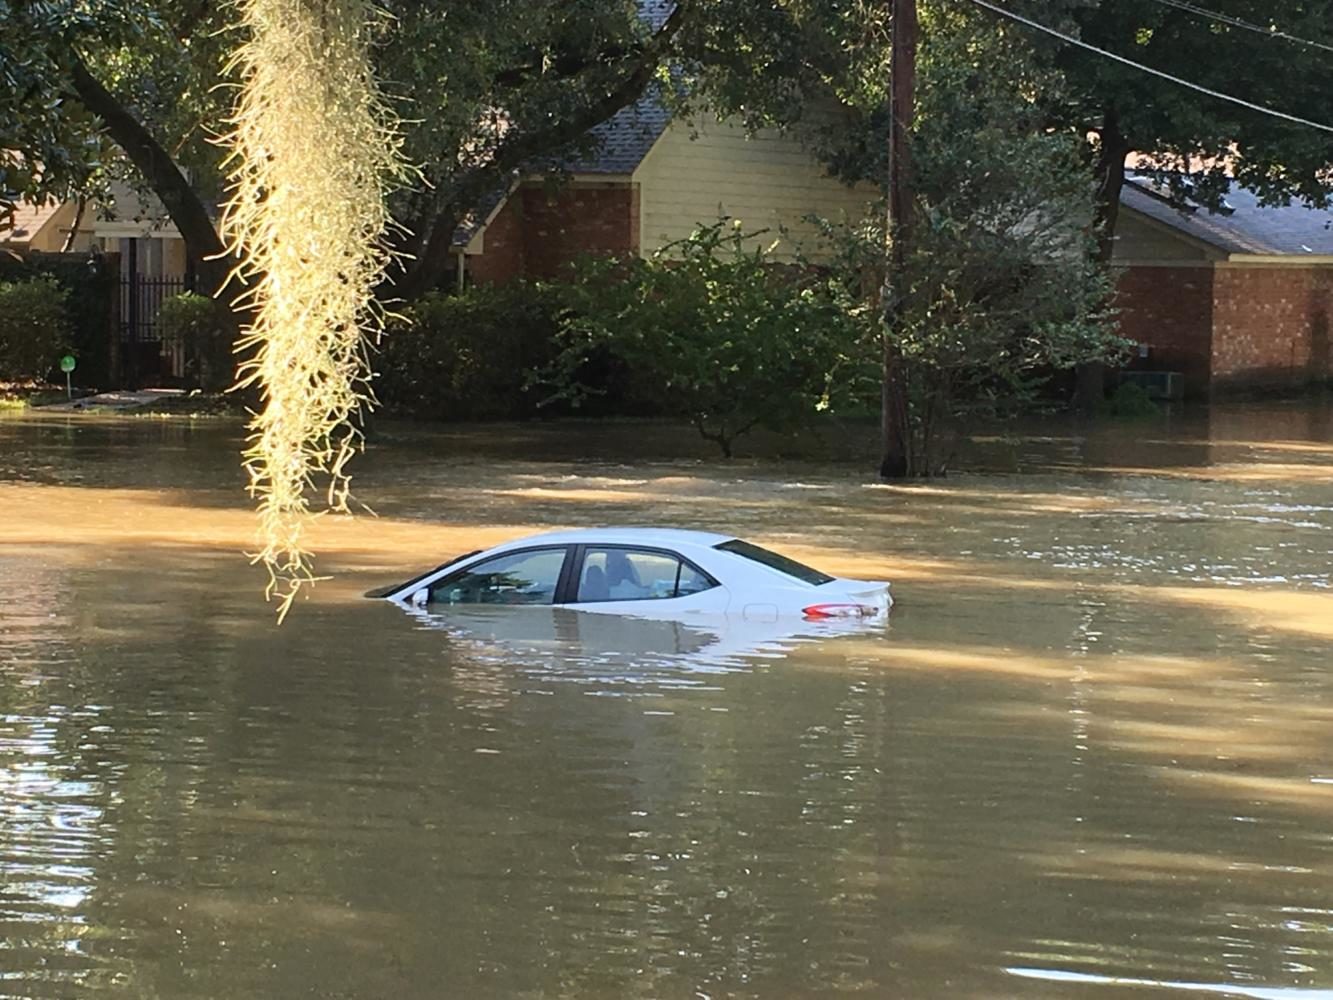 These photos of the flood devastation were taken in Houston by family and friends of yearbook adviser Alison Strelitz.

Her parents were able to stay in their home, but many friends had to evacuate.